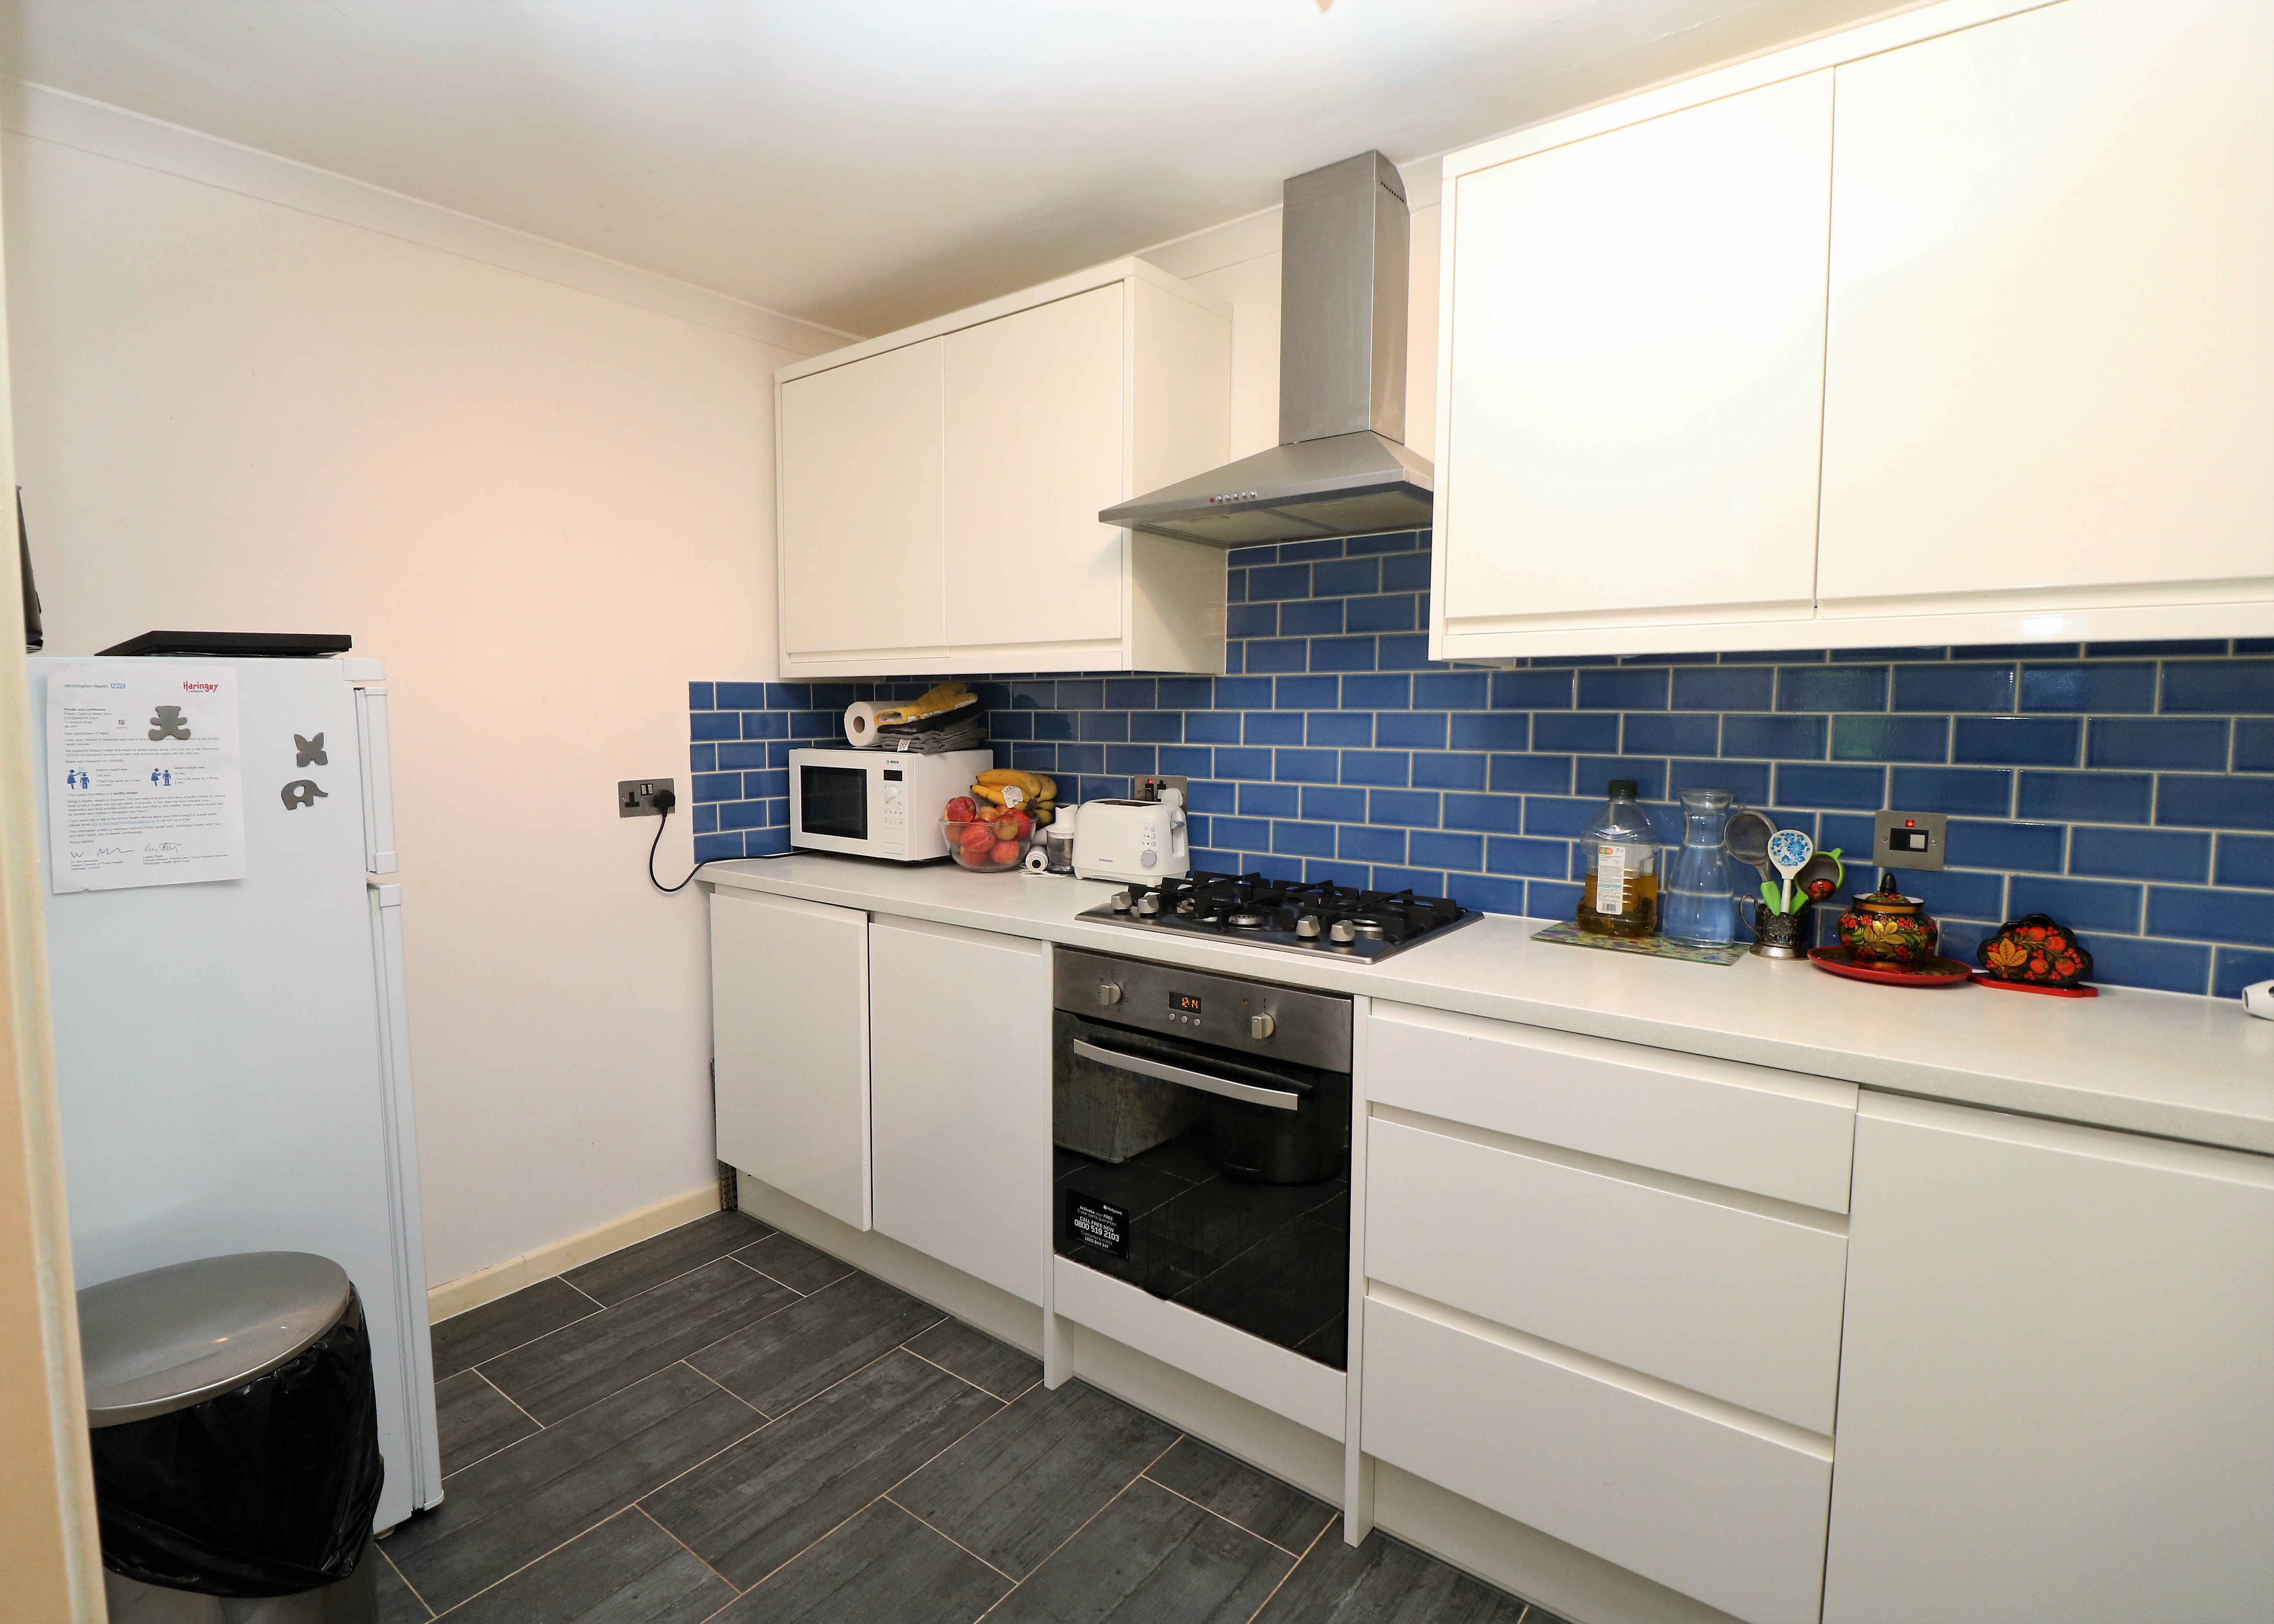 Private ground floor two double bedroom flat in N6. Crouch End borders of Highgate.